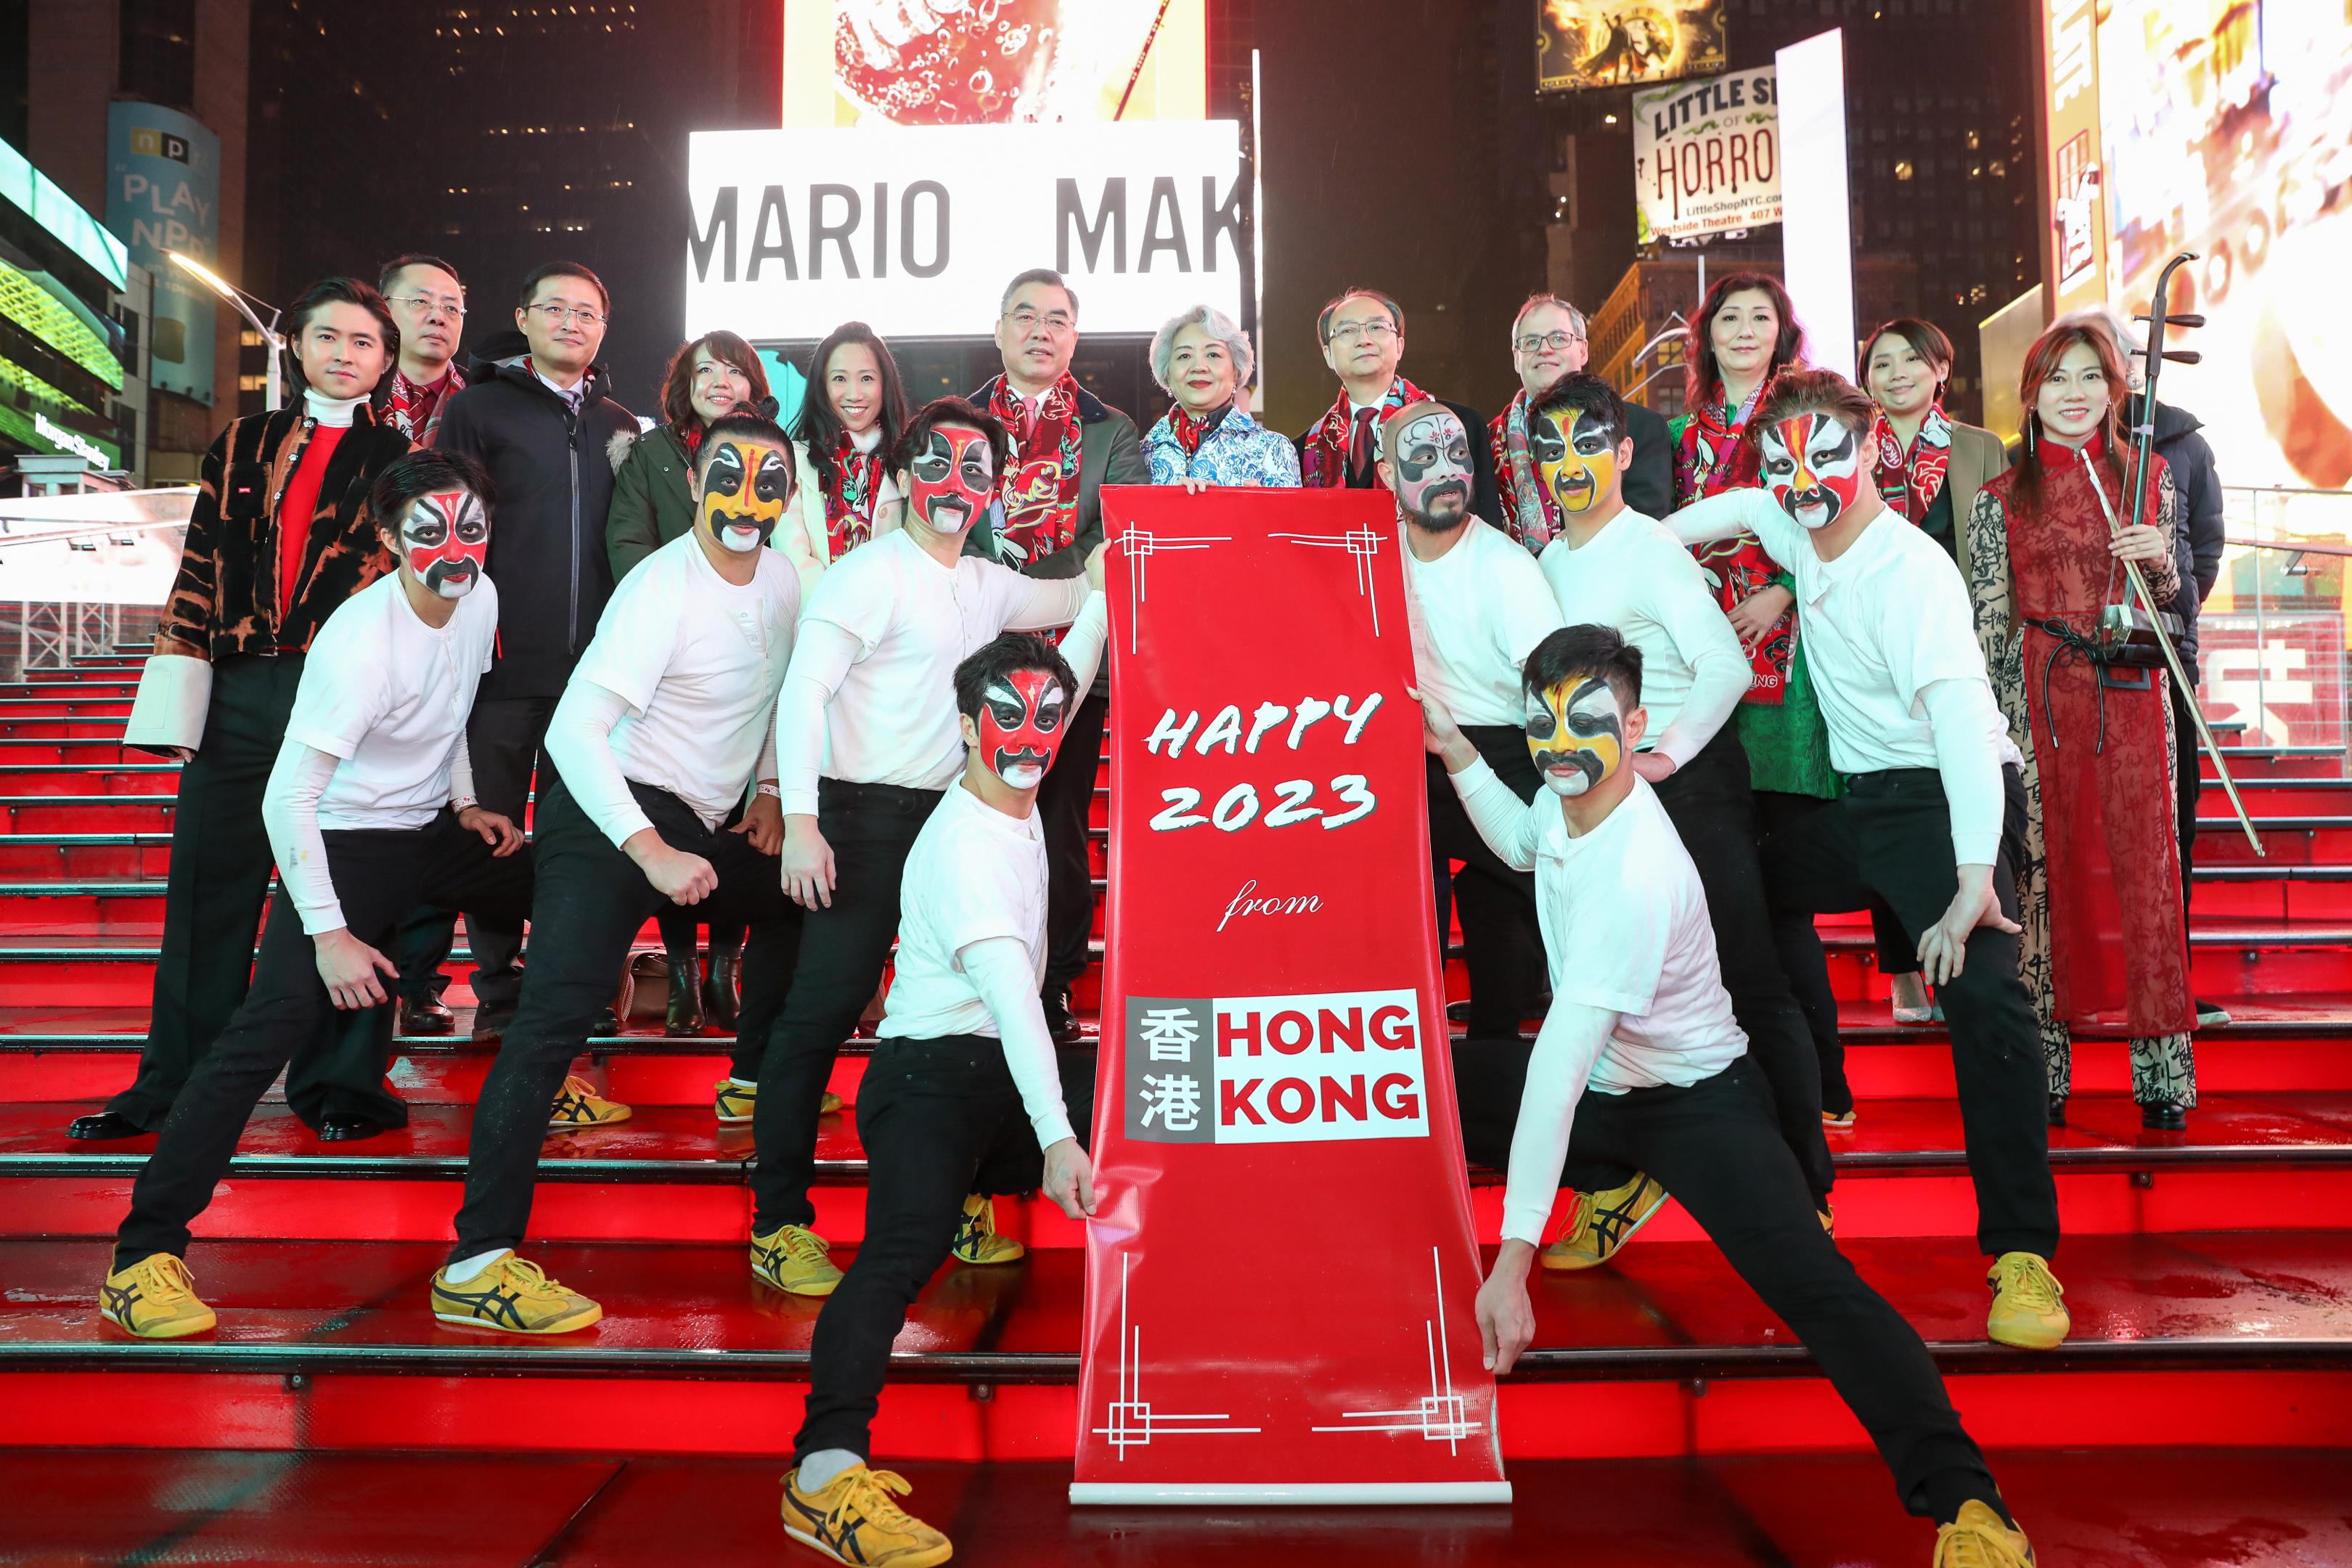 Hong Kong artists enthralled a worldwide audience by kicking off the New York Times Square countdown celebration with a "Kung Fu Contemporary Circus" on December 31, 2022 (New York time). Photo shows participating Hong Kong artists with officiating guests sending new year's greetings to the world.